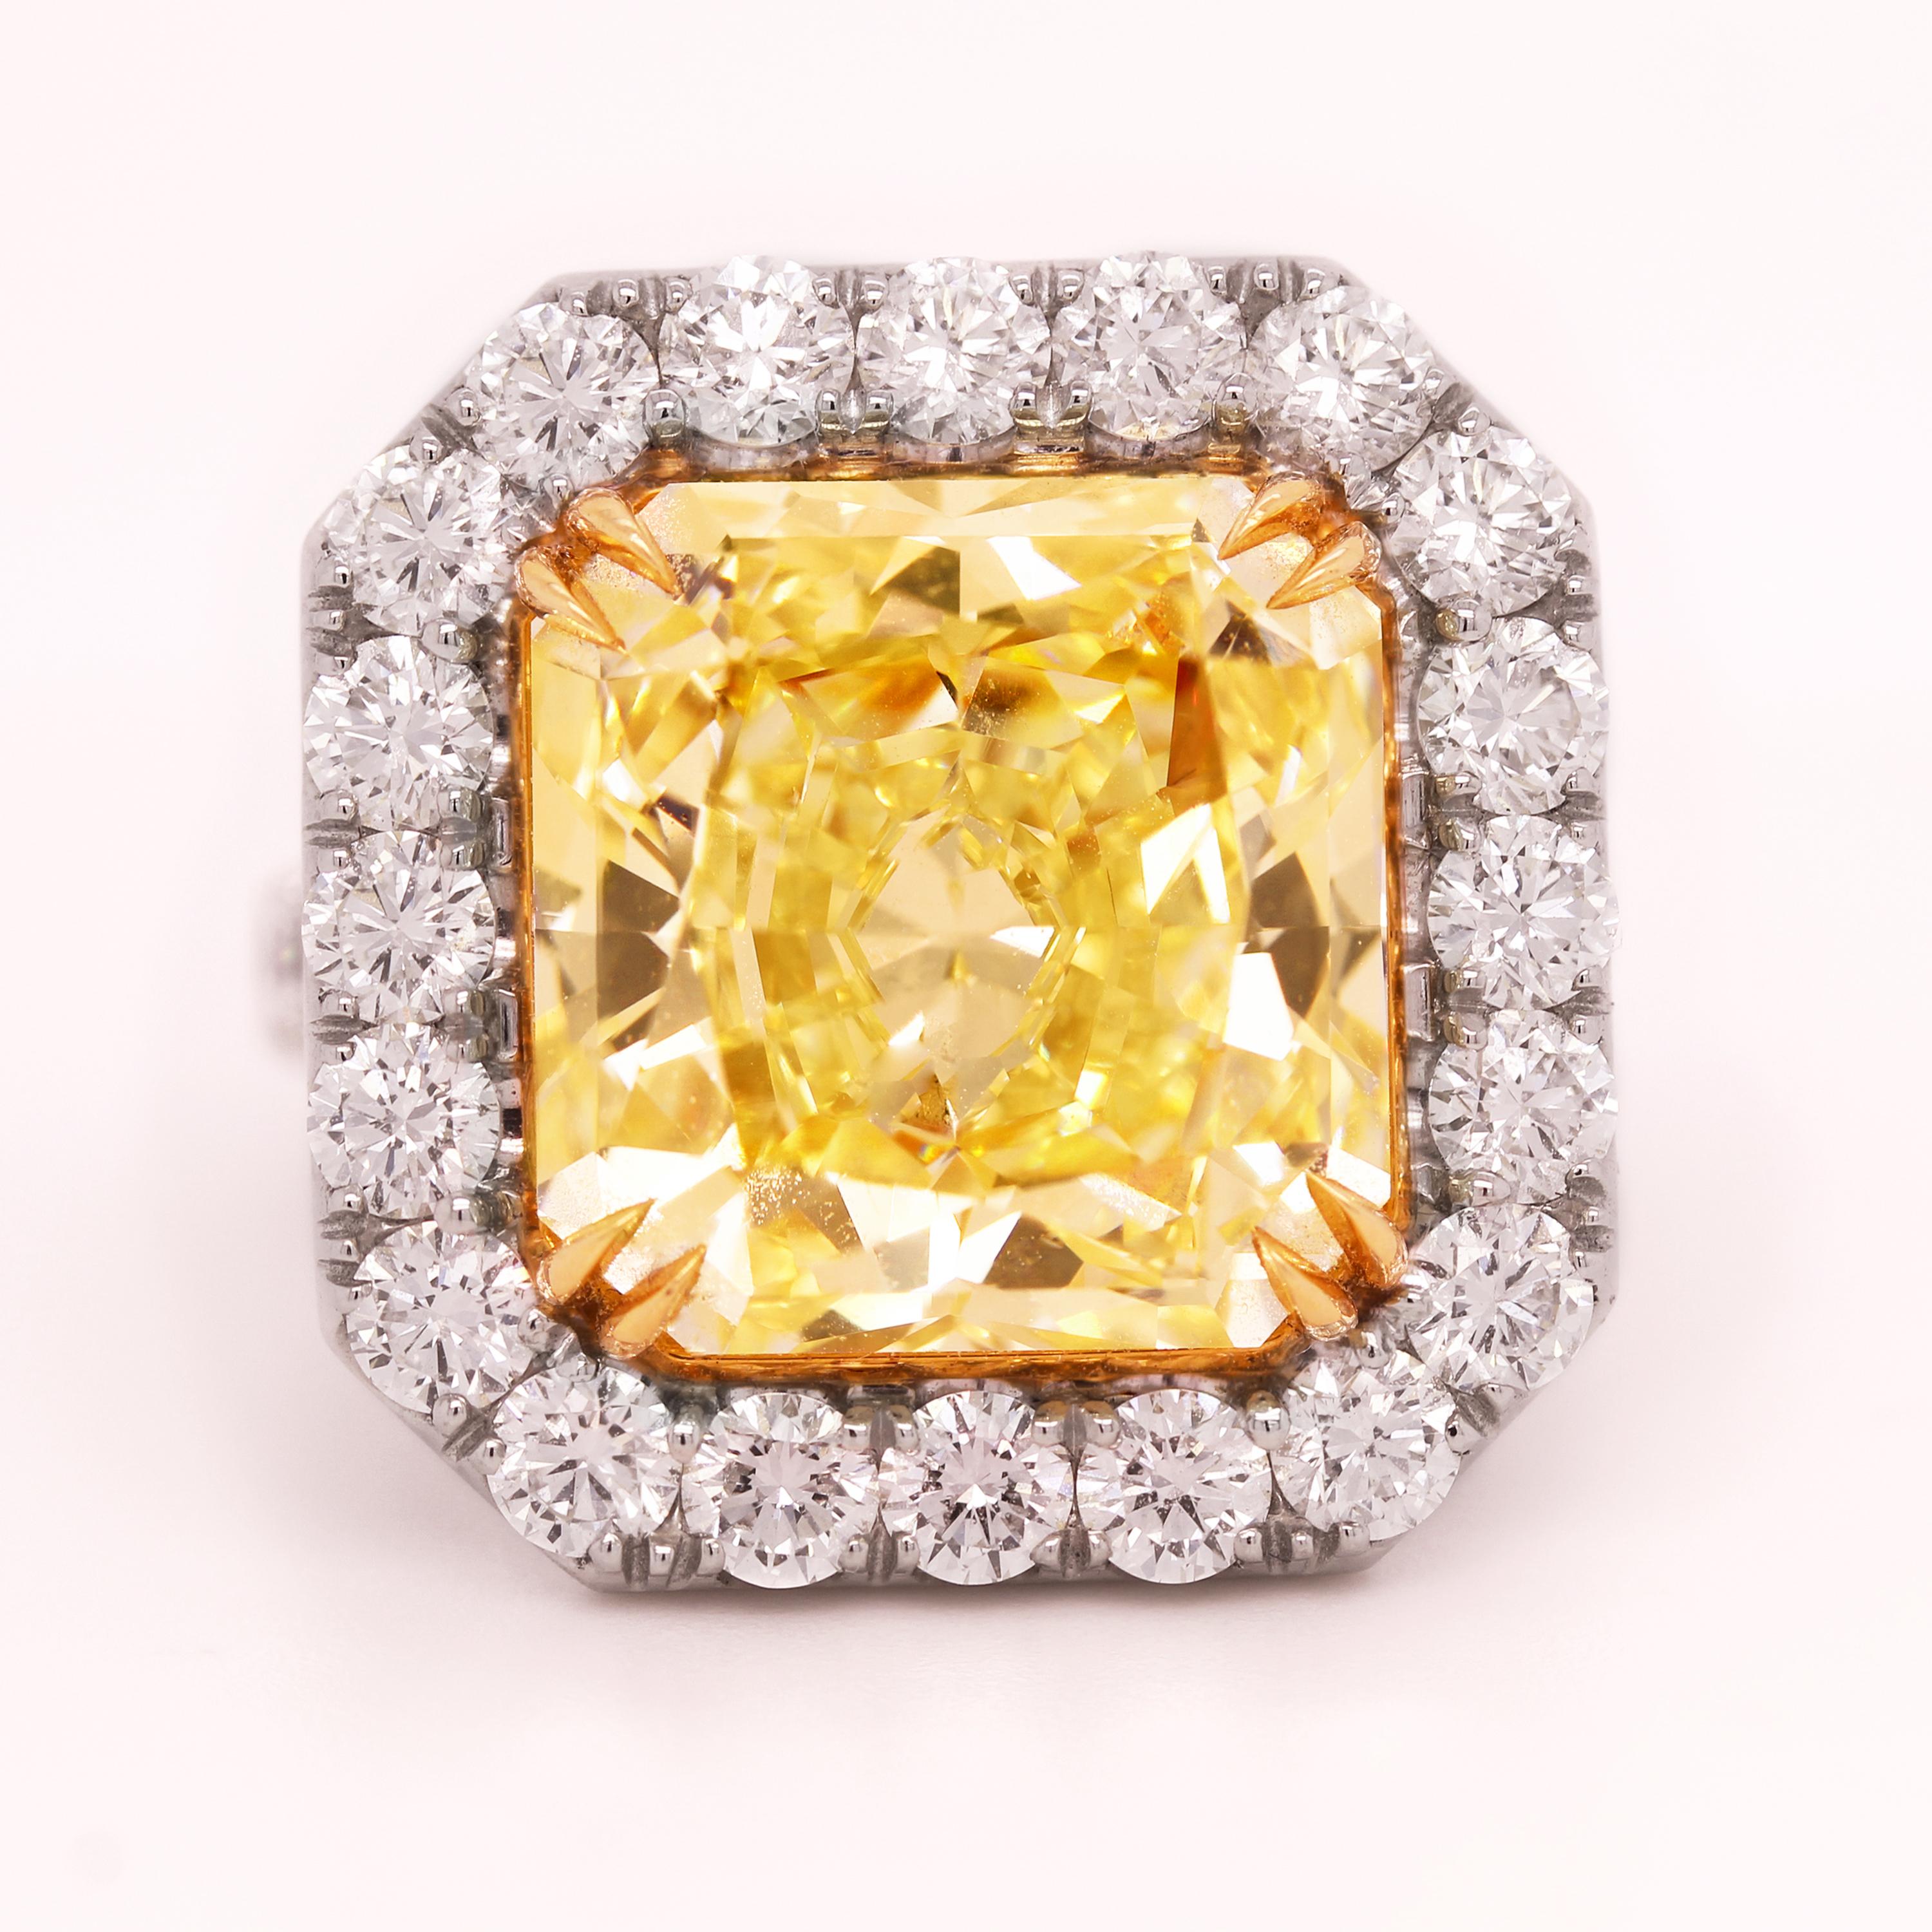 GIA Certified 11.22 Carat Radiant Fancy Intense Yellow Diamond Ring

A spectacular 11.22 carat, Radiant, FIY diamond center, graded by GIA as a VVS2 with diamonds surrounding all throughout the piece set entirely in platinum

Apprx. 3.00 carat G